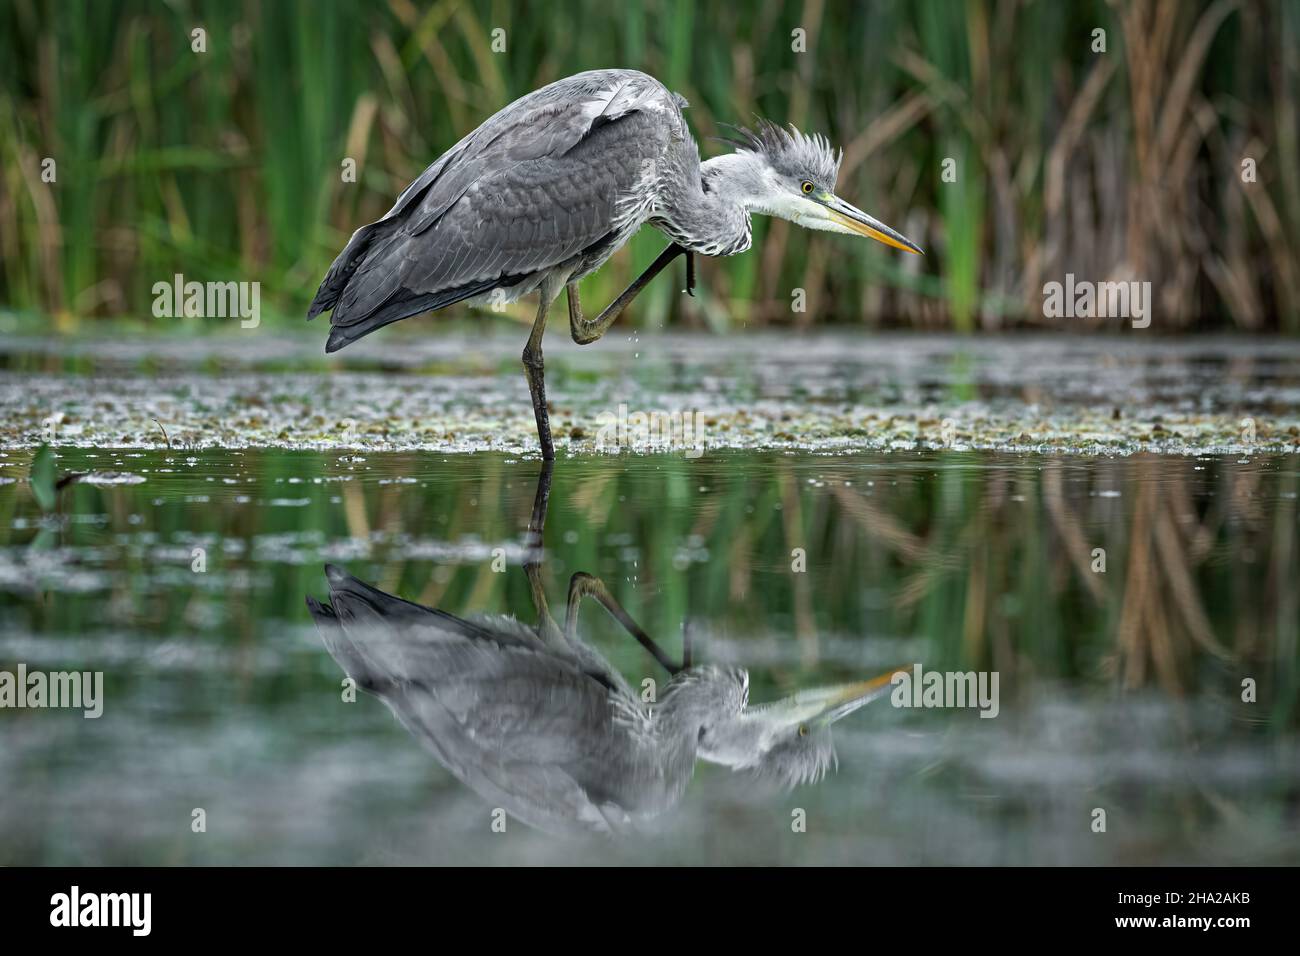 A grey, grey, heron standing in water scratching. Its head feathers are sticking up. The reflection is in the water Stock Photo